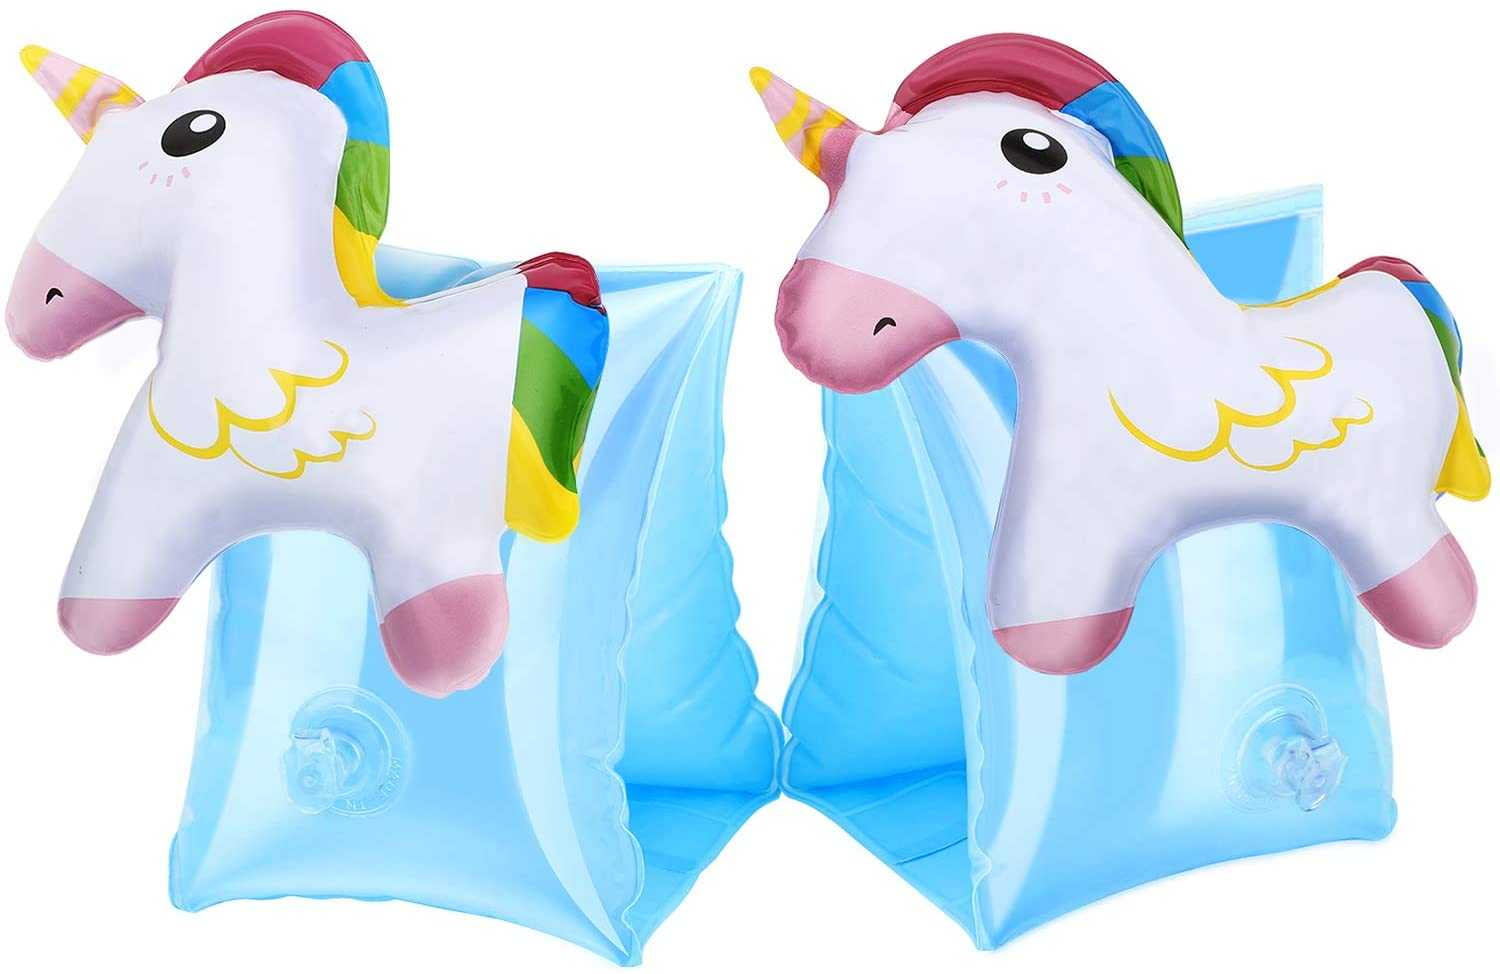 Details about   Swim Safe:Inflatable Armband Floats Water Wings Floaties Pink Fish Ages 3-6 yrs. 